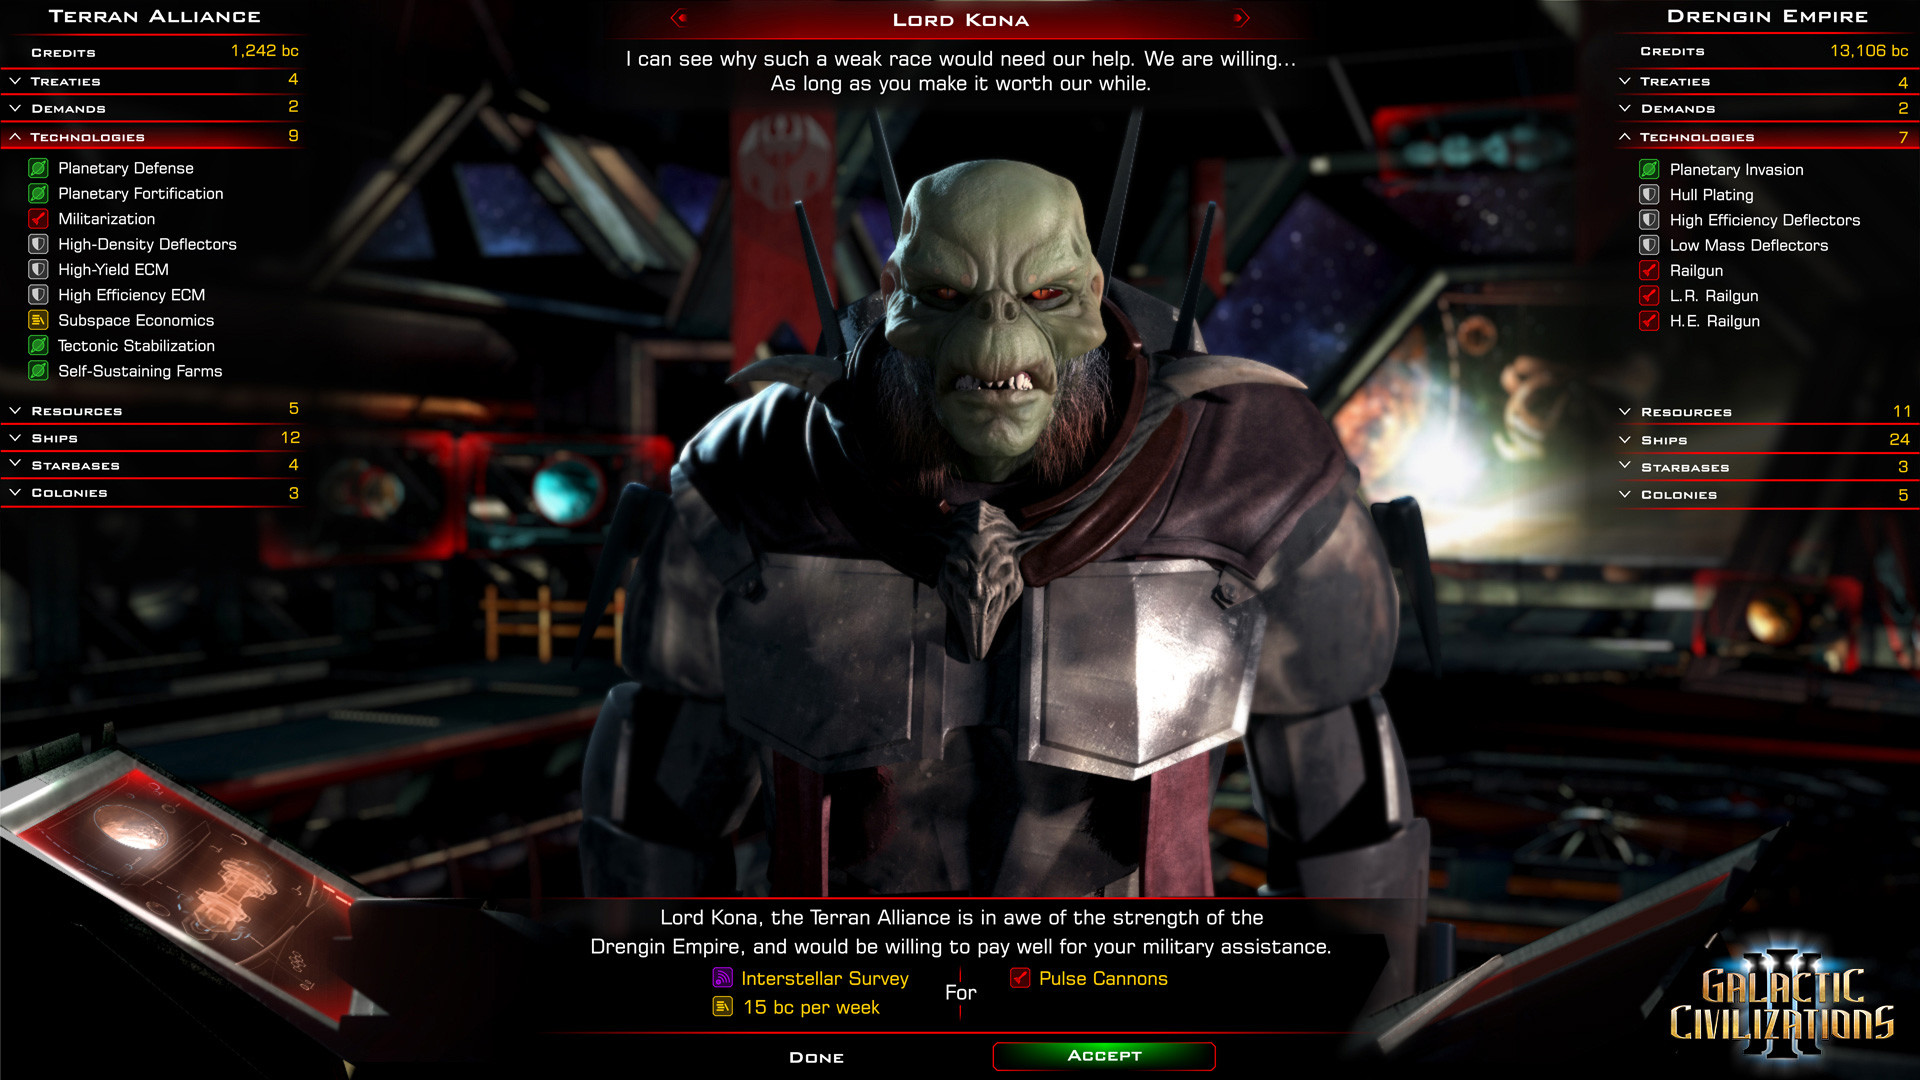 New Free Update for Galactic Civilizations III Makes AI Smarter and Tougher